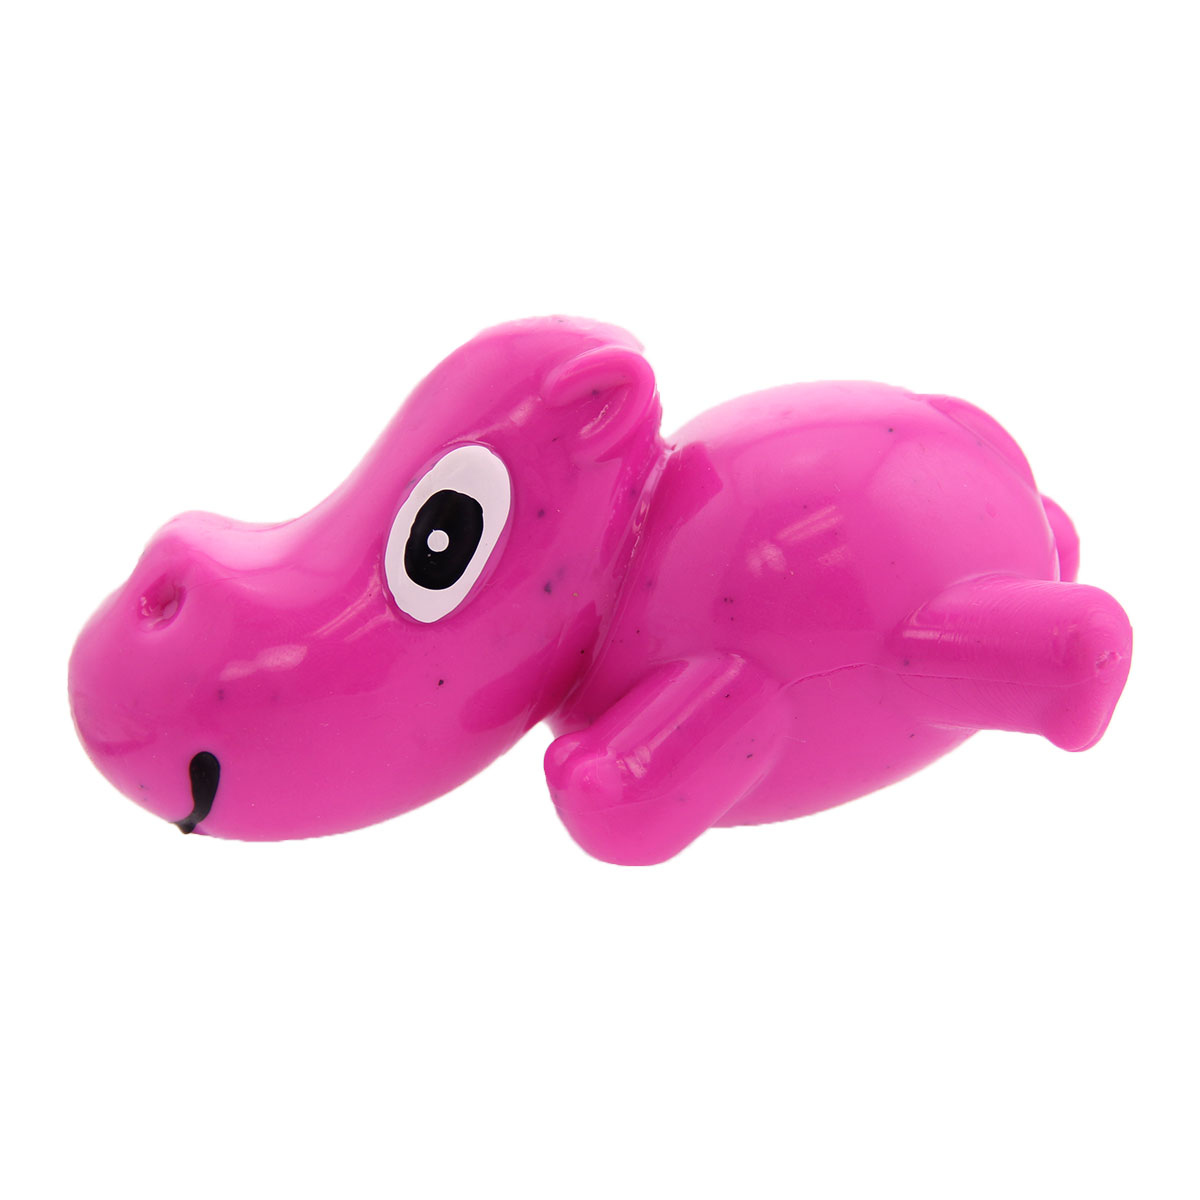 Cycle Dog 3-Play Hippo Dog Toy - Pink